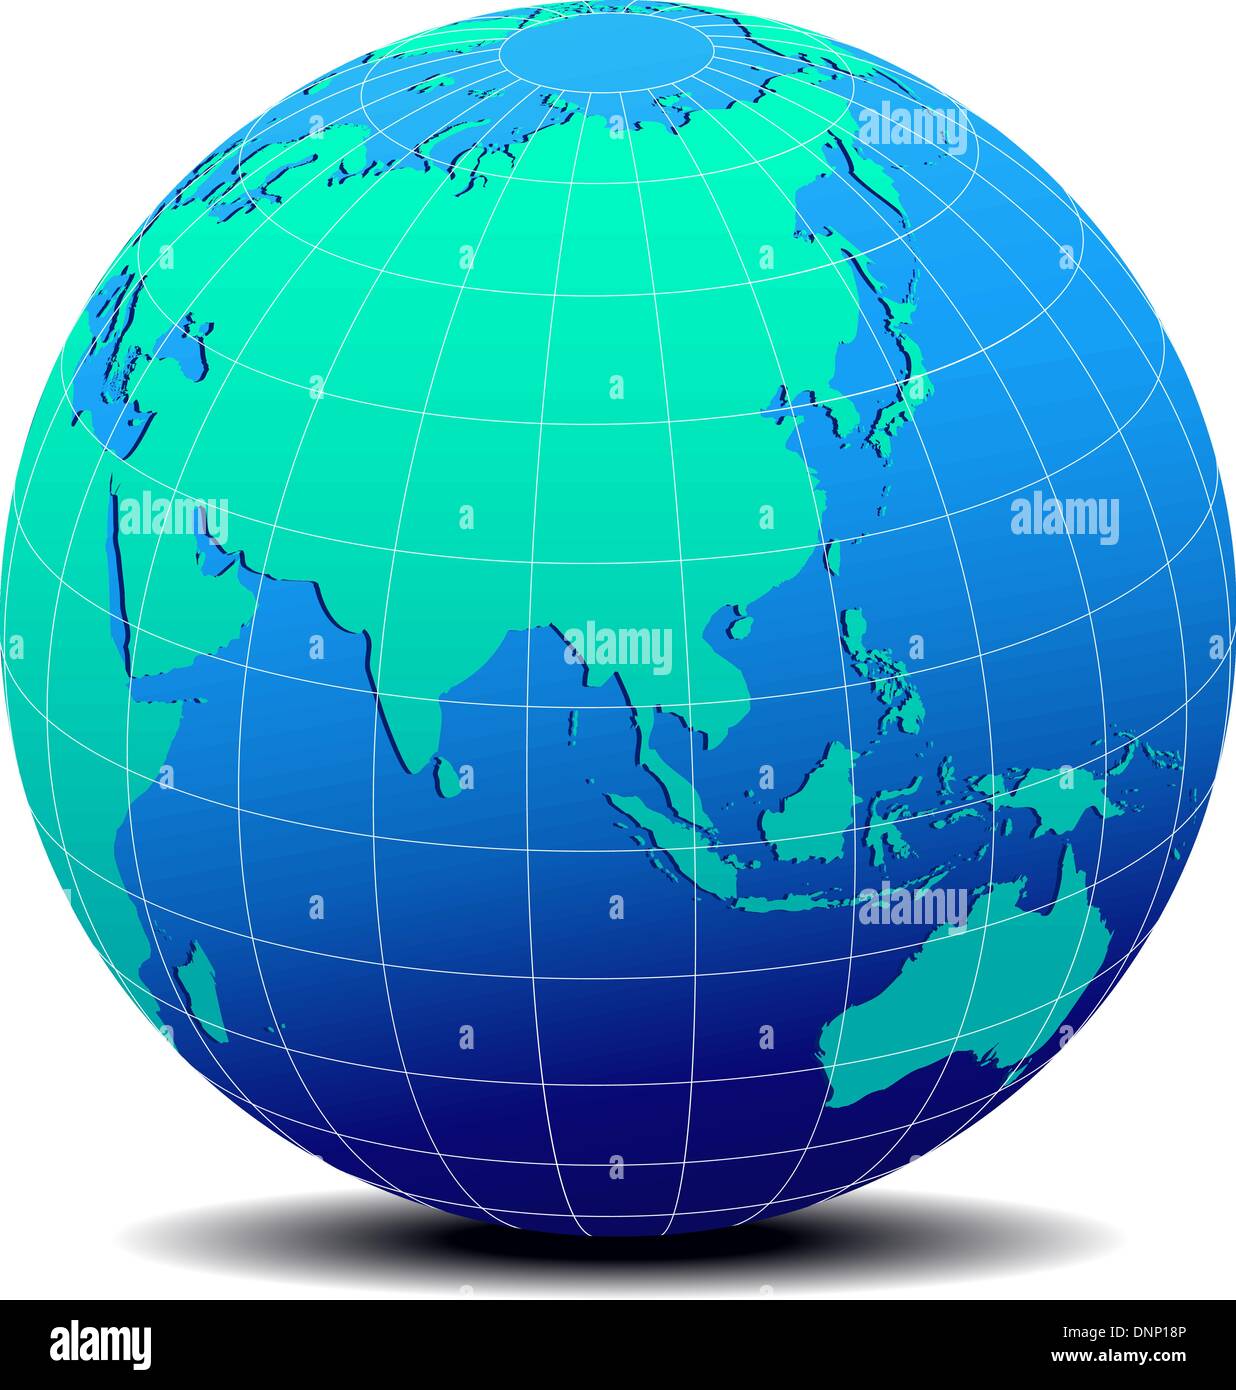 Vector Map Icon of the world in Globe form - Asia - China, Malaysia, Philippines Stock Vector